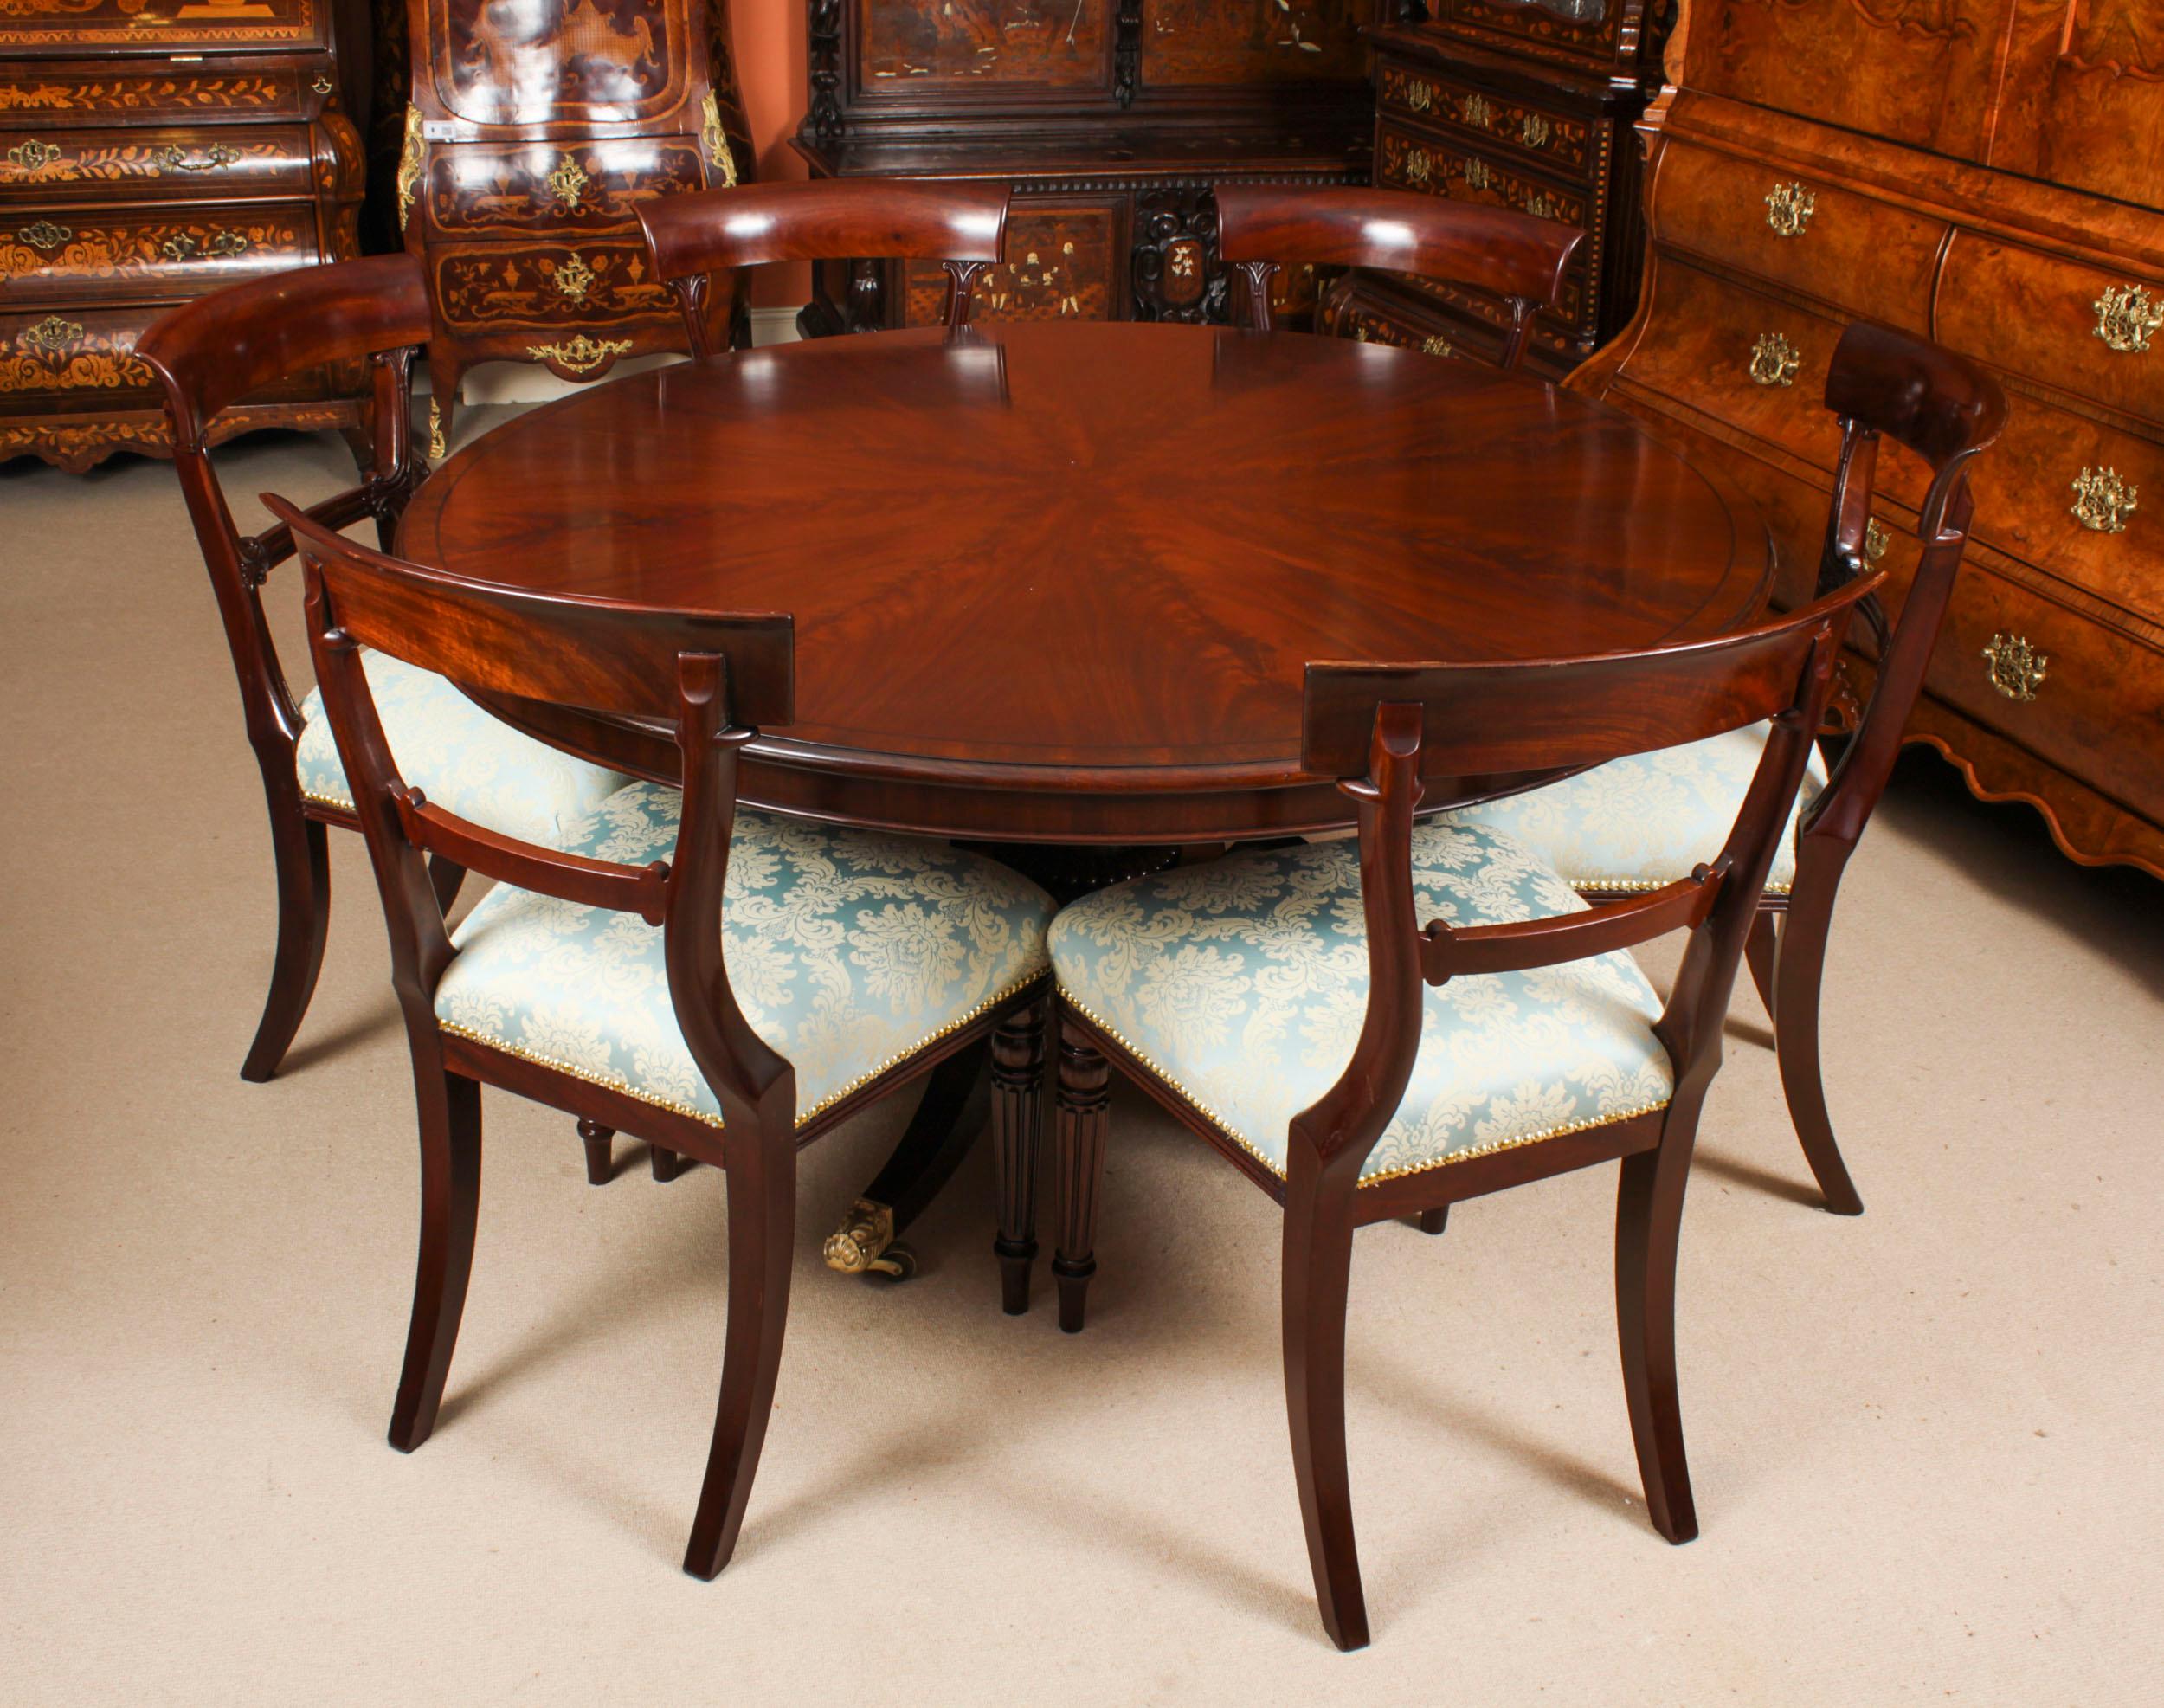 A stunning antique William IV breakfast table / loo table in the manner of Gillows and the matching set of six William IV dining chairs, all circa 1830 in date.

The lovely figured flame mahogany circular top that sits on a mahogany hand turned